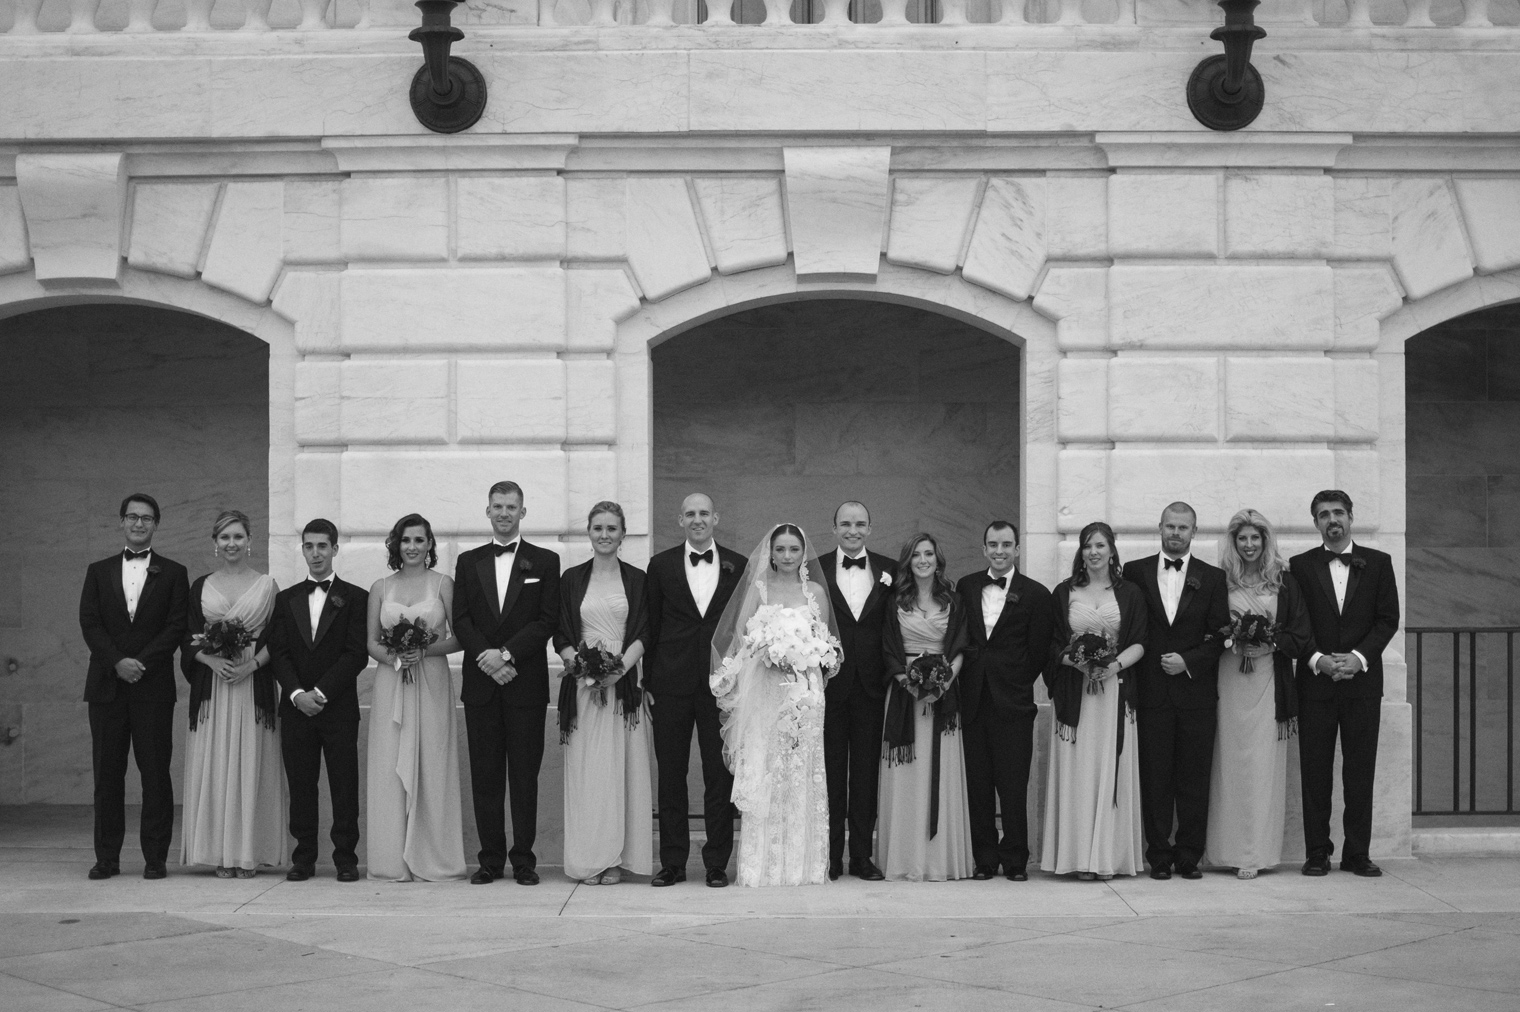 Wedding party portraits at the Detroit Institute of Arts by Wedding Photographer Heather Jowett.